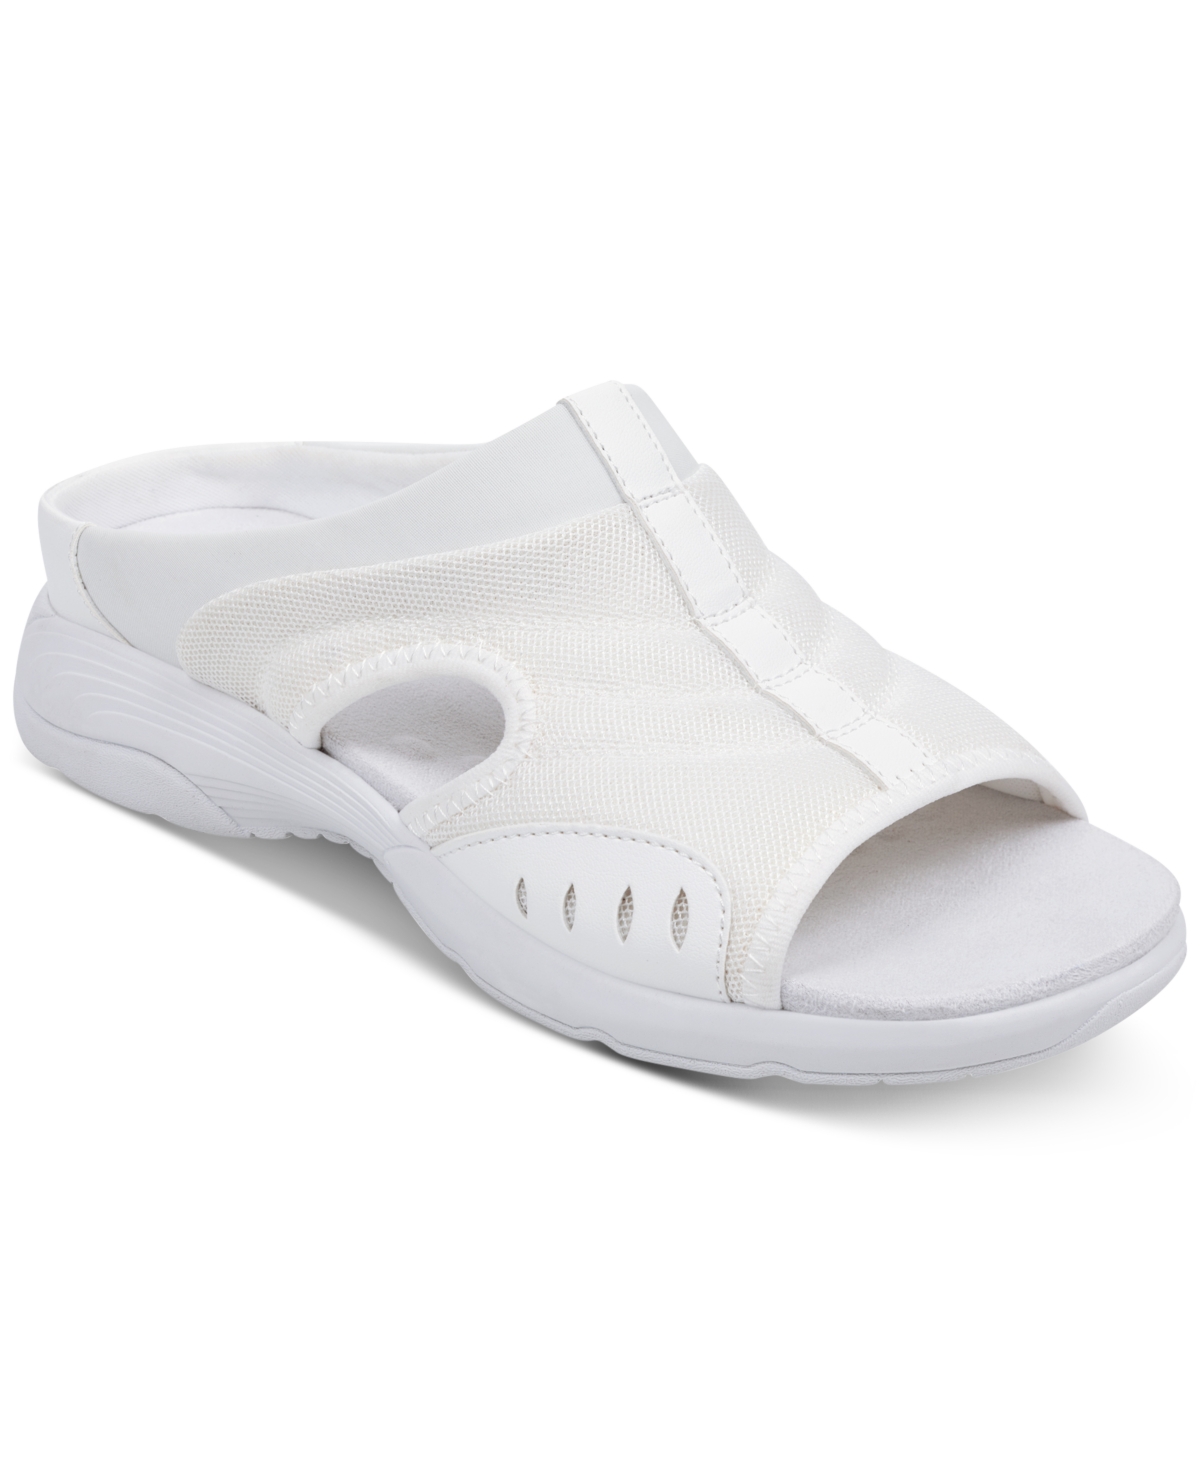 UPC 192733303814 product image for Easy Spirit Women's Traciee Square Toe Casual Slide Sandals Women's Shoes | upcitemdb.com